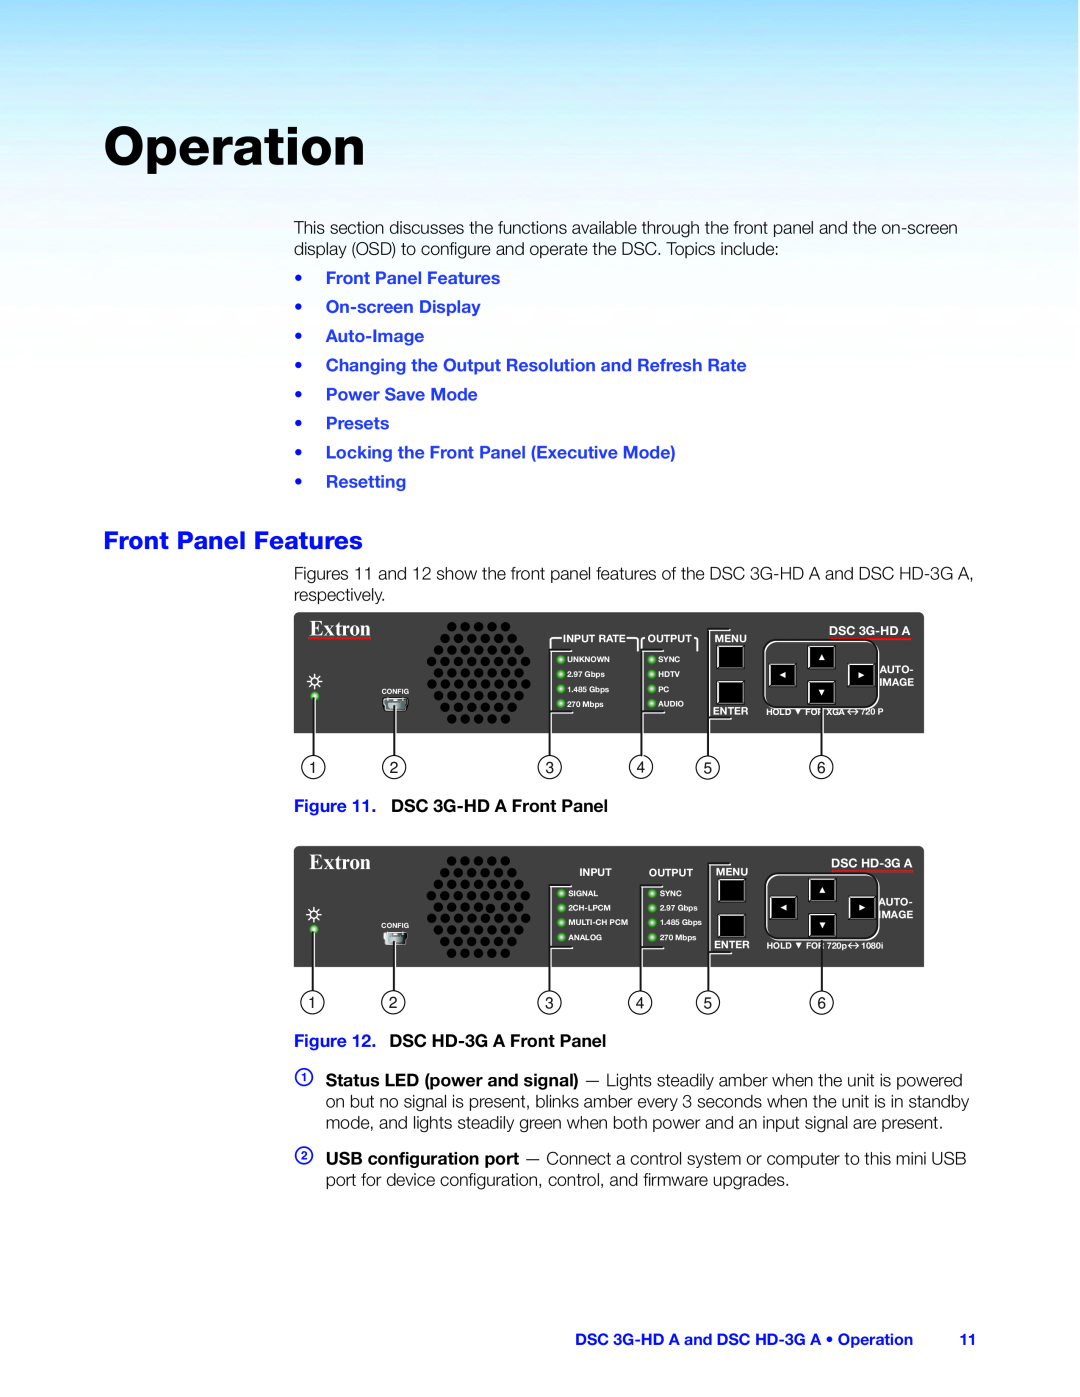 Extron electronic Operation, Front Panel Features On-screen Display Auto-Image, DSC 3G-HD A Front Panel, Extron 